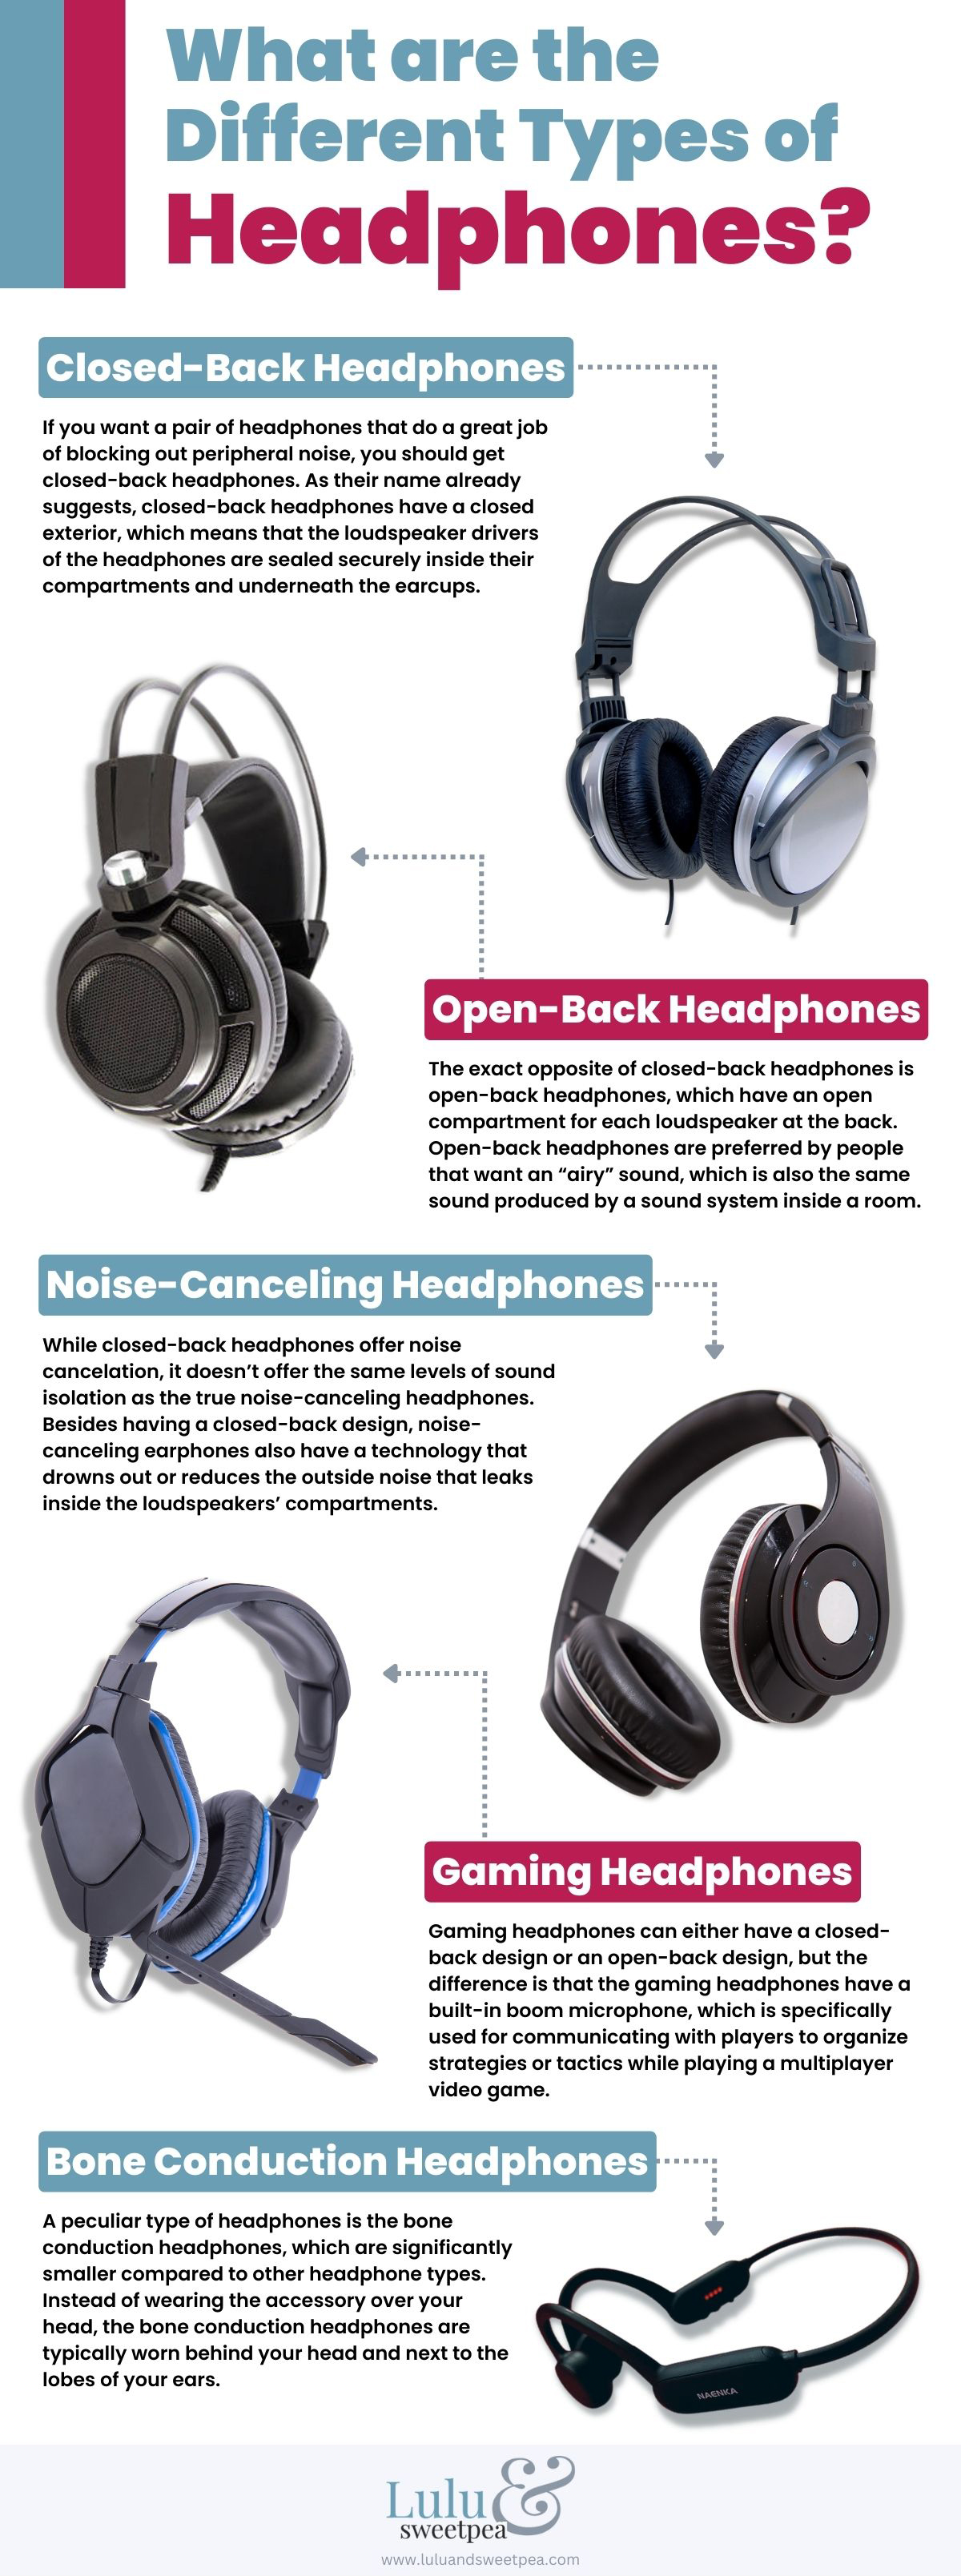 What are the Different Types of Headphones